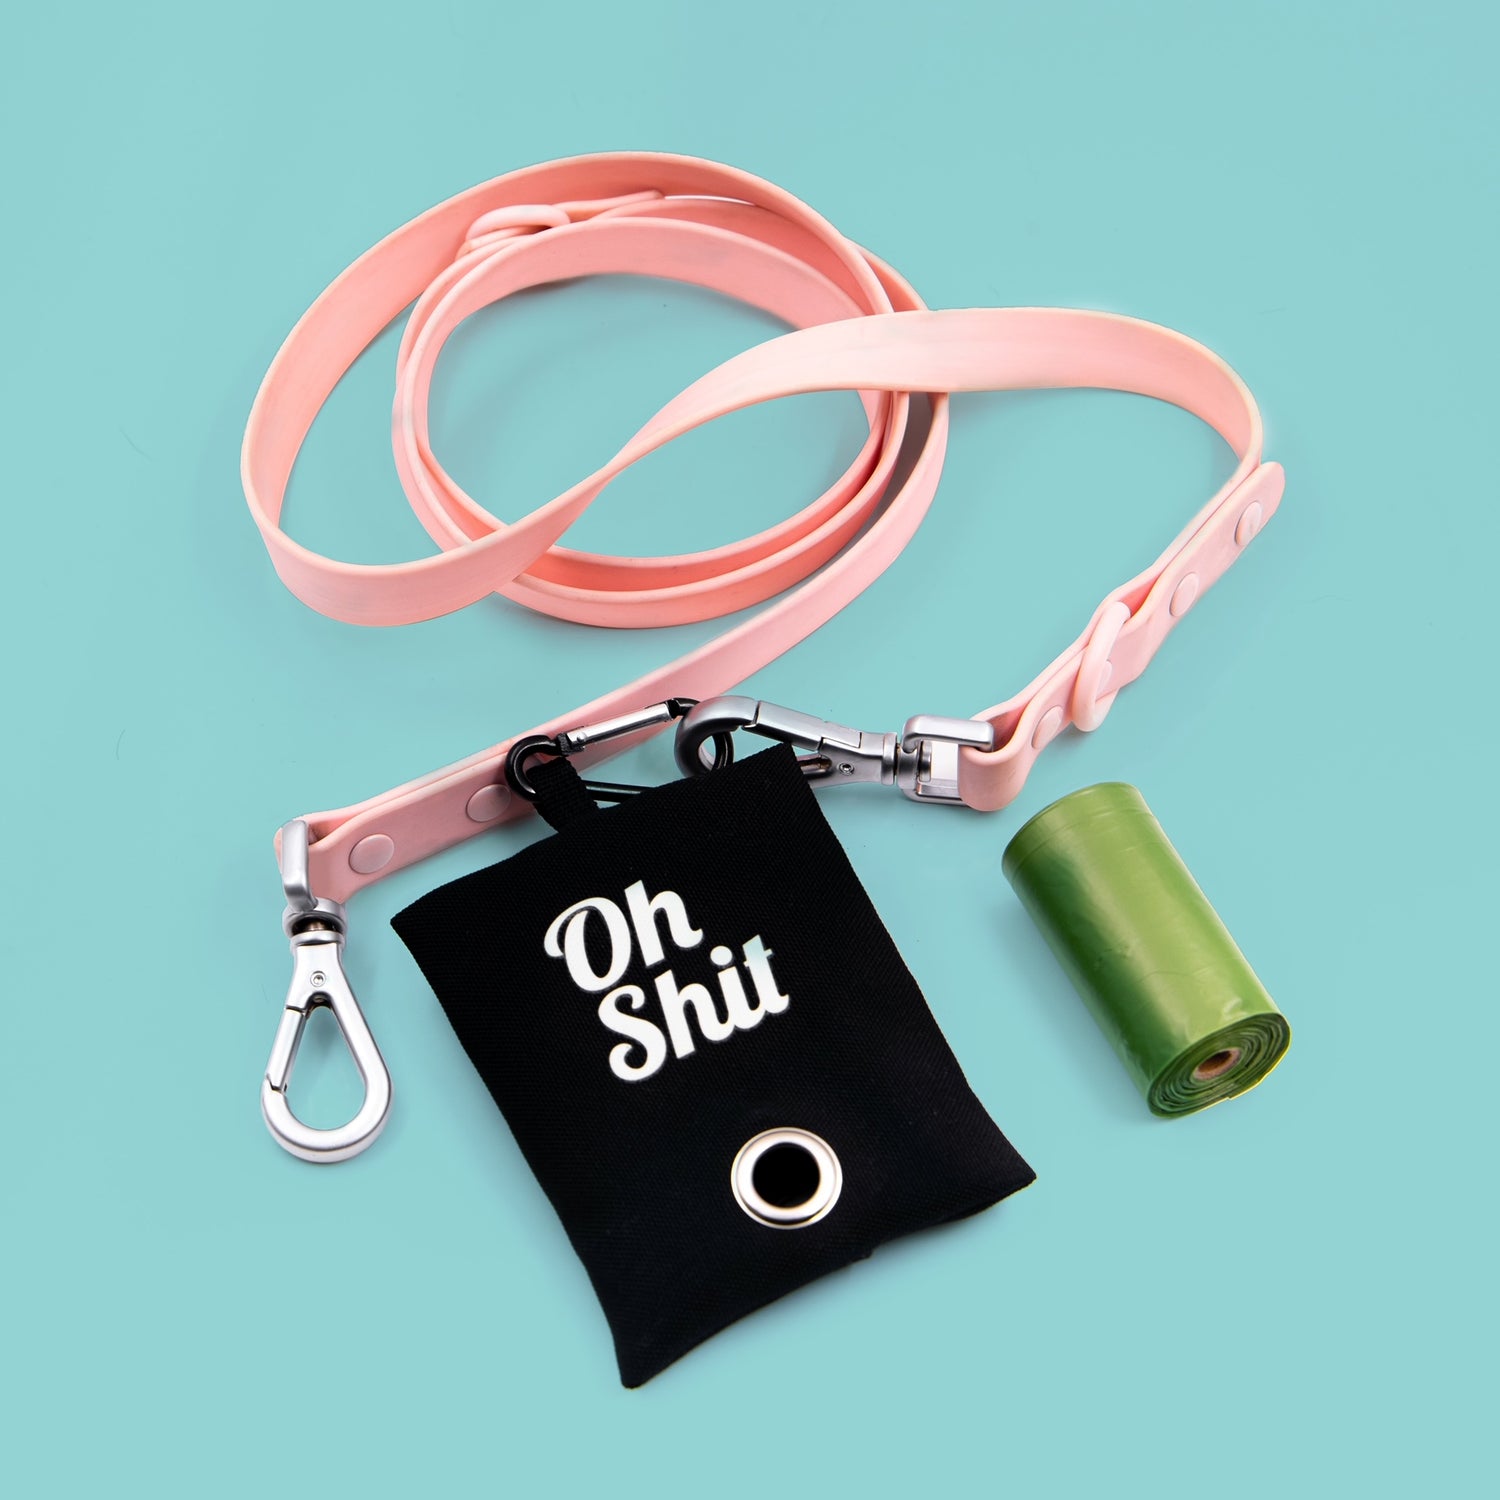 This pouch makes the hard part of your walks in the park more fun. Say goodbye to your cracked, plastic bag holder, and swap it out with this Oh Shit! Poop Bag / Pouch. The pouch can hold two standard size rolls of bags or one roll of bags and some treats or other smallish items.